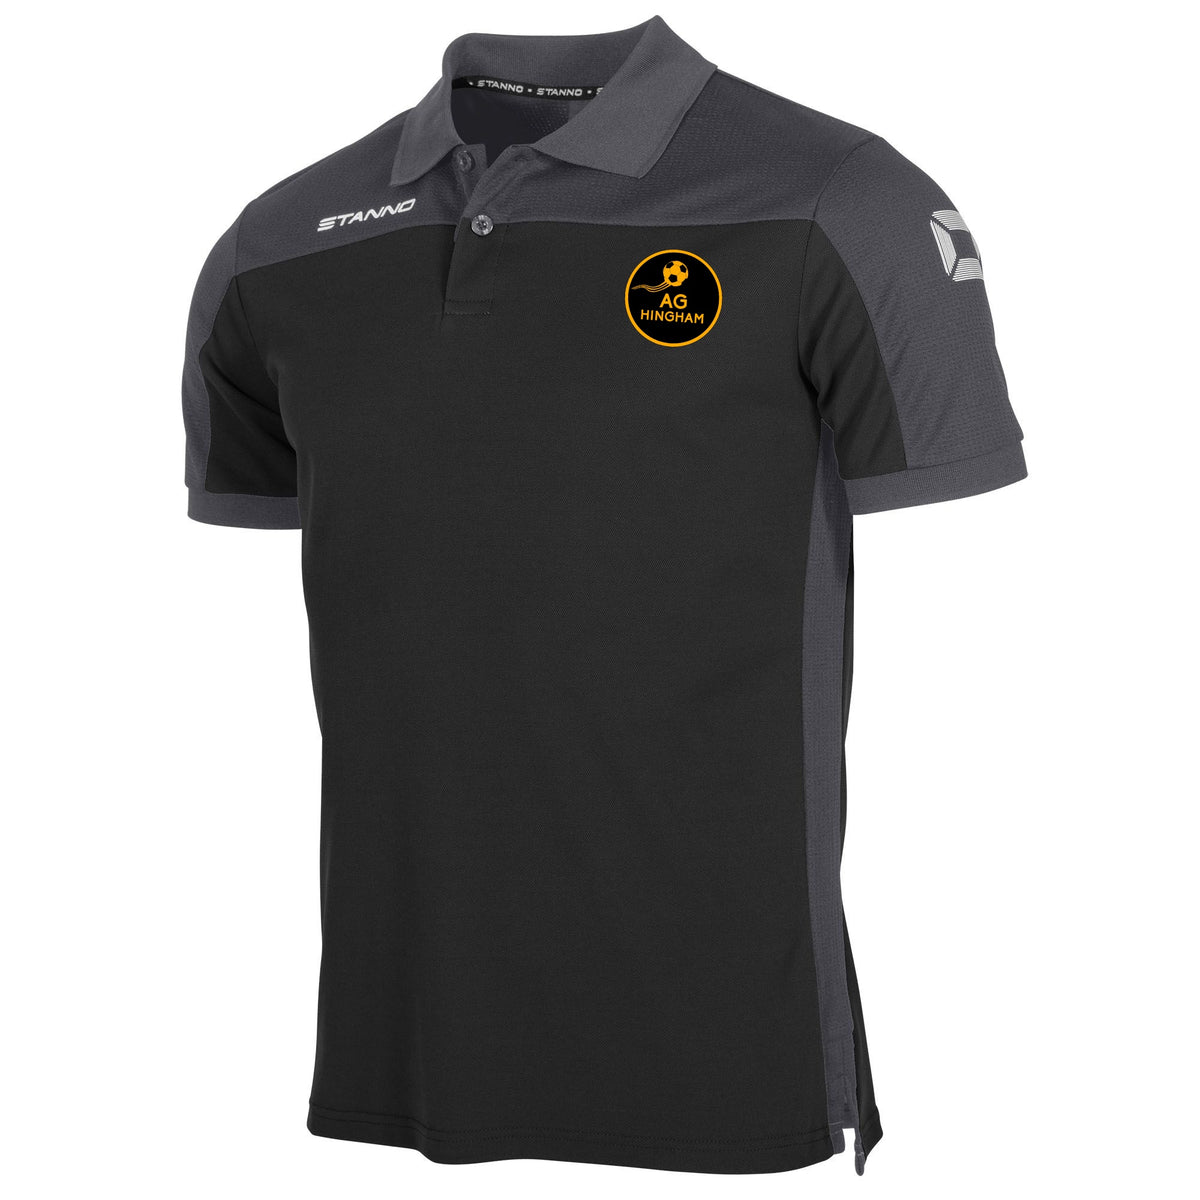 AG Hingham Stanno Pride Polo in Adult